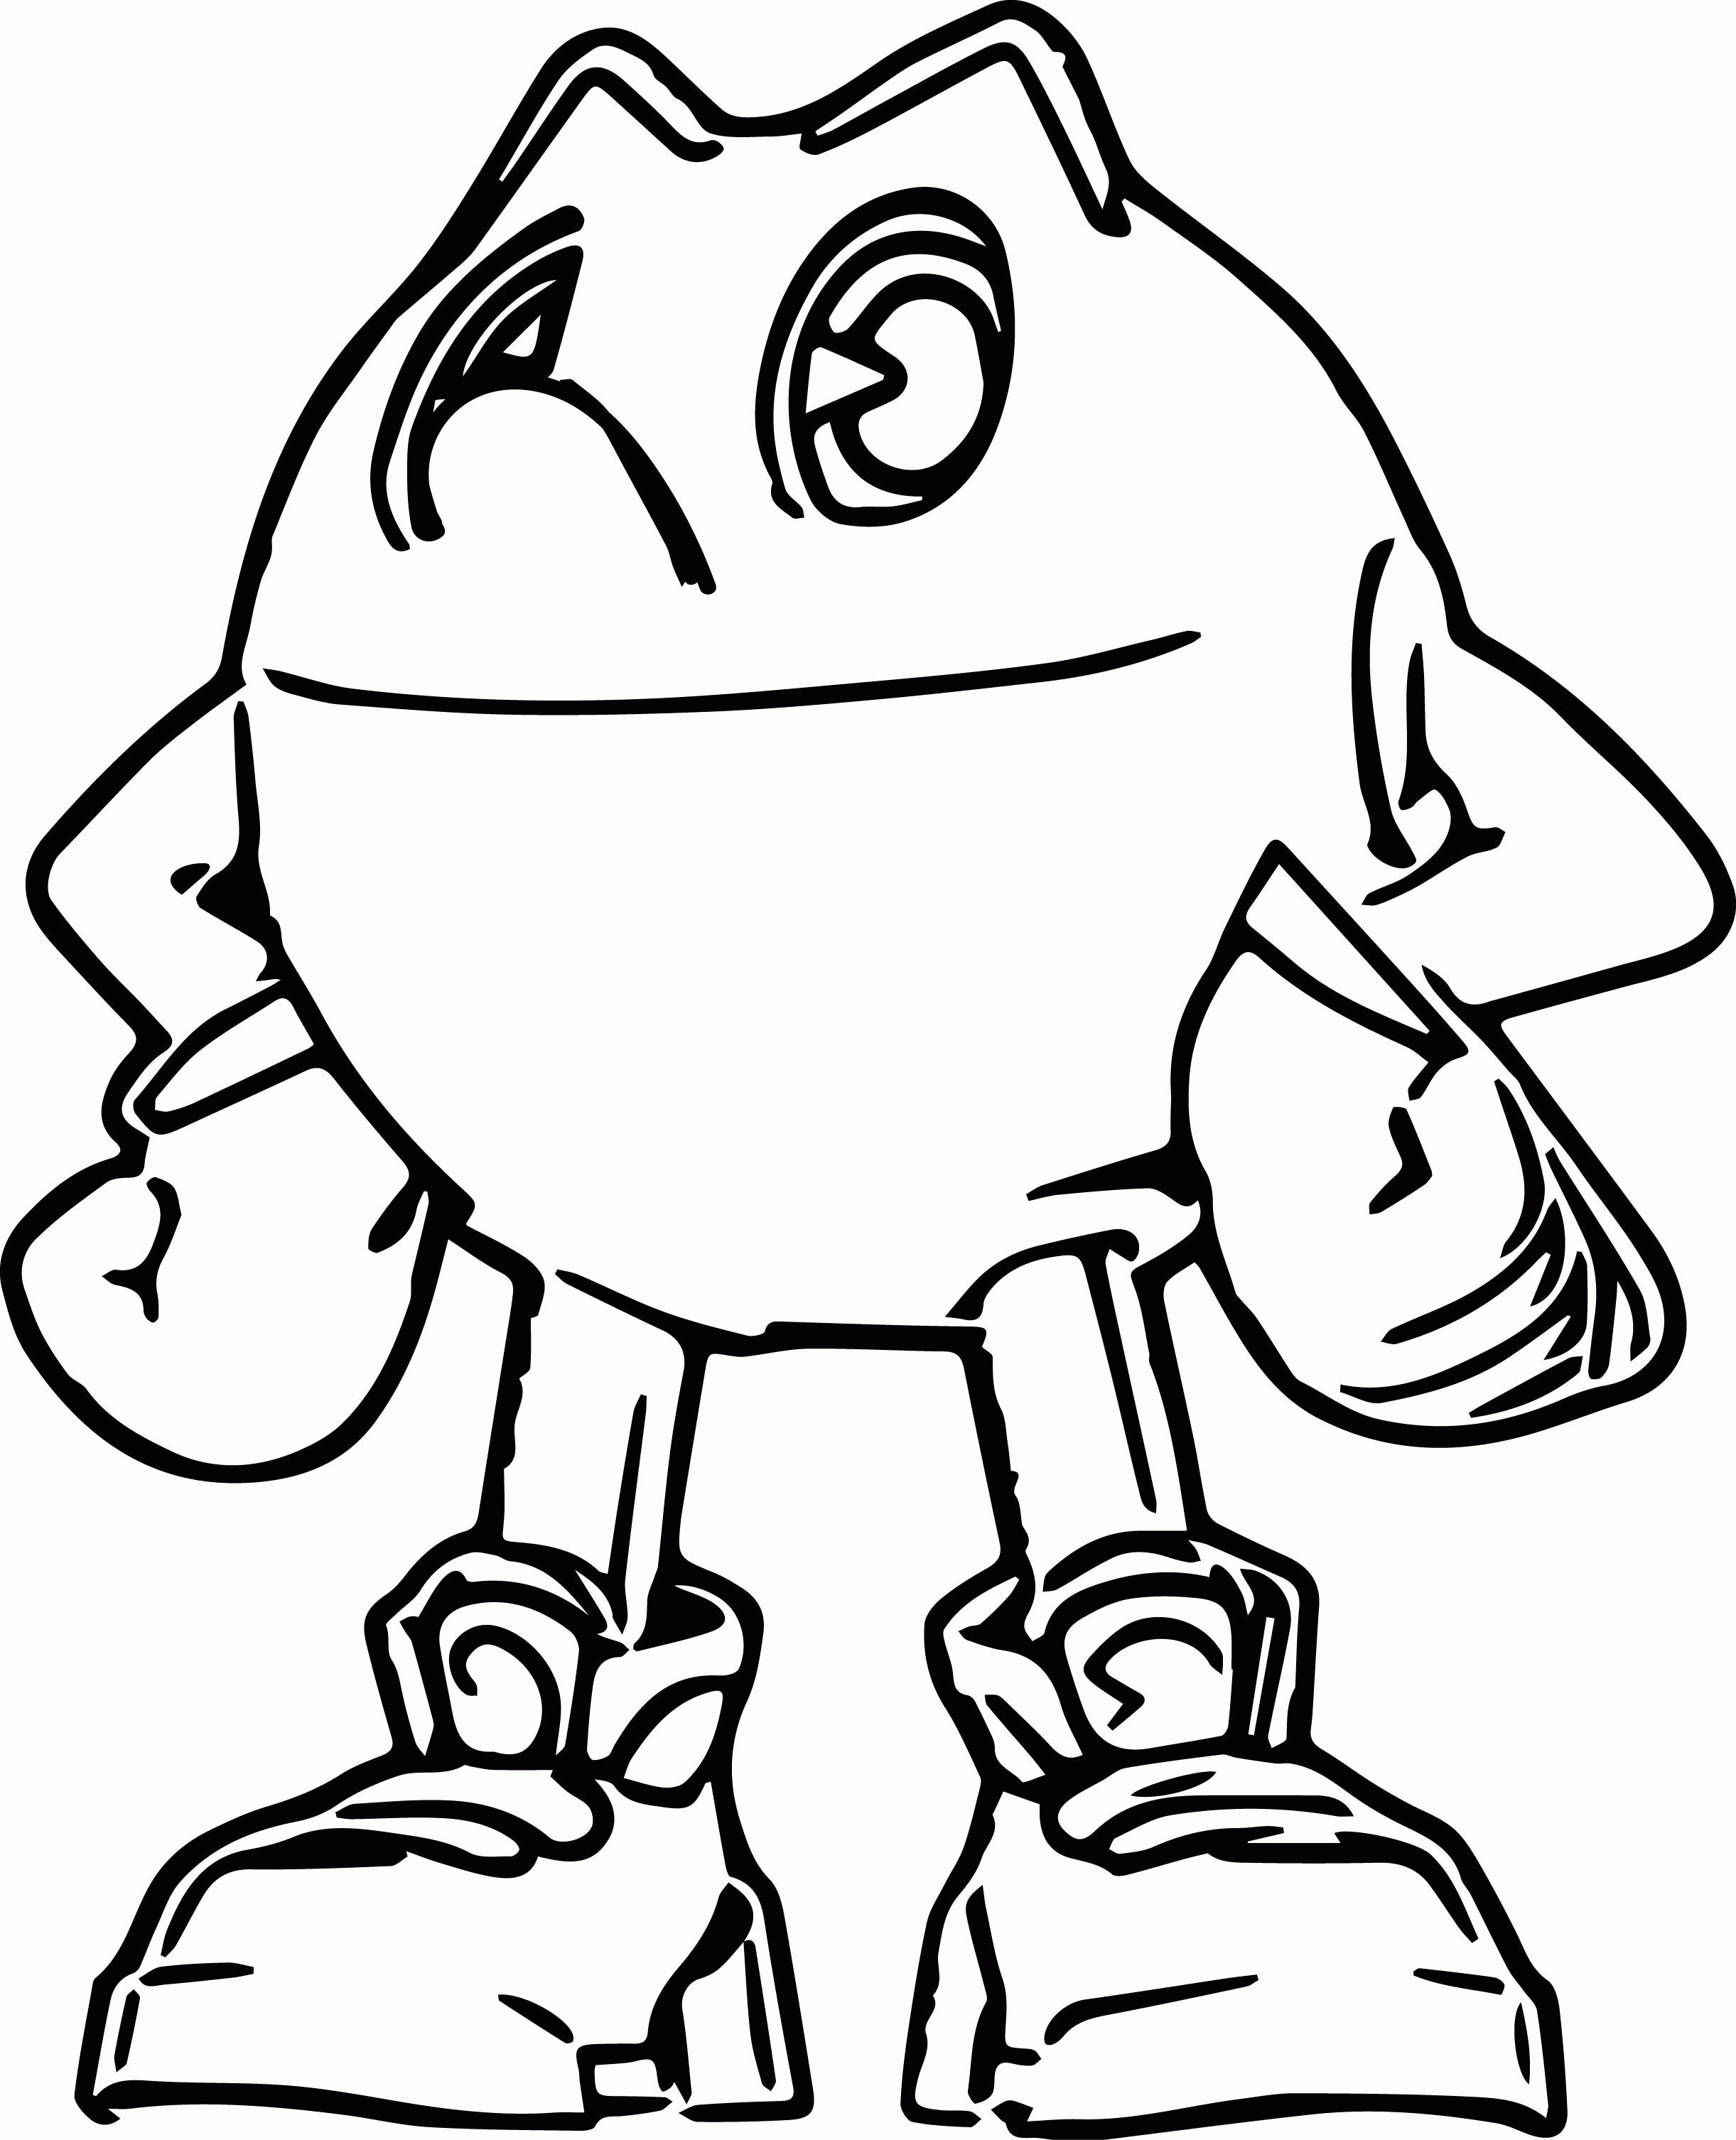 Pacman - Coloring Pages for Kids and for Adults